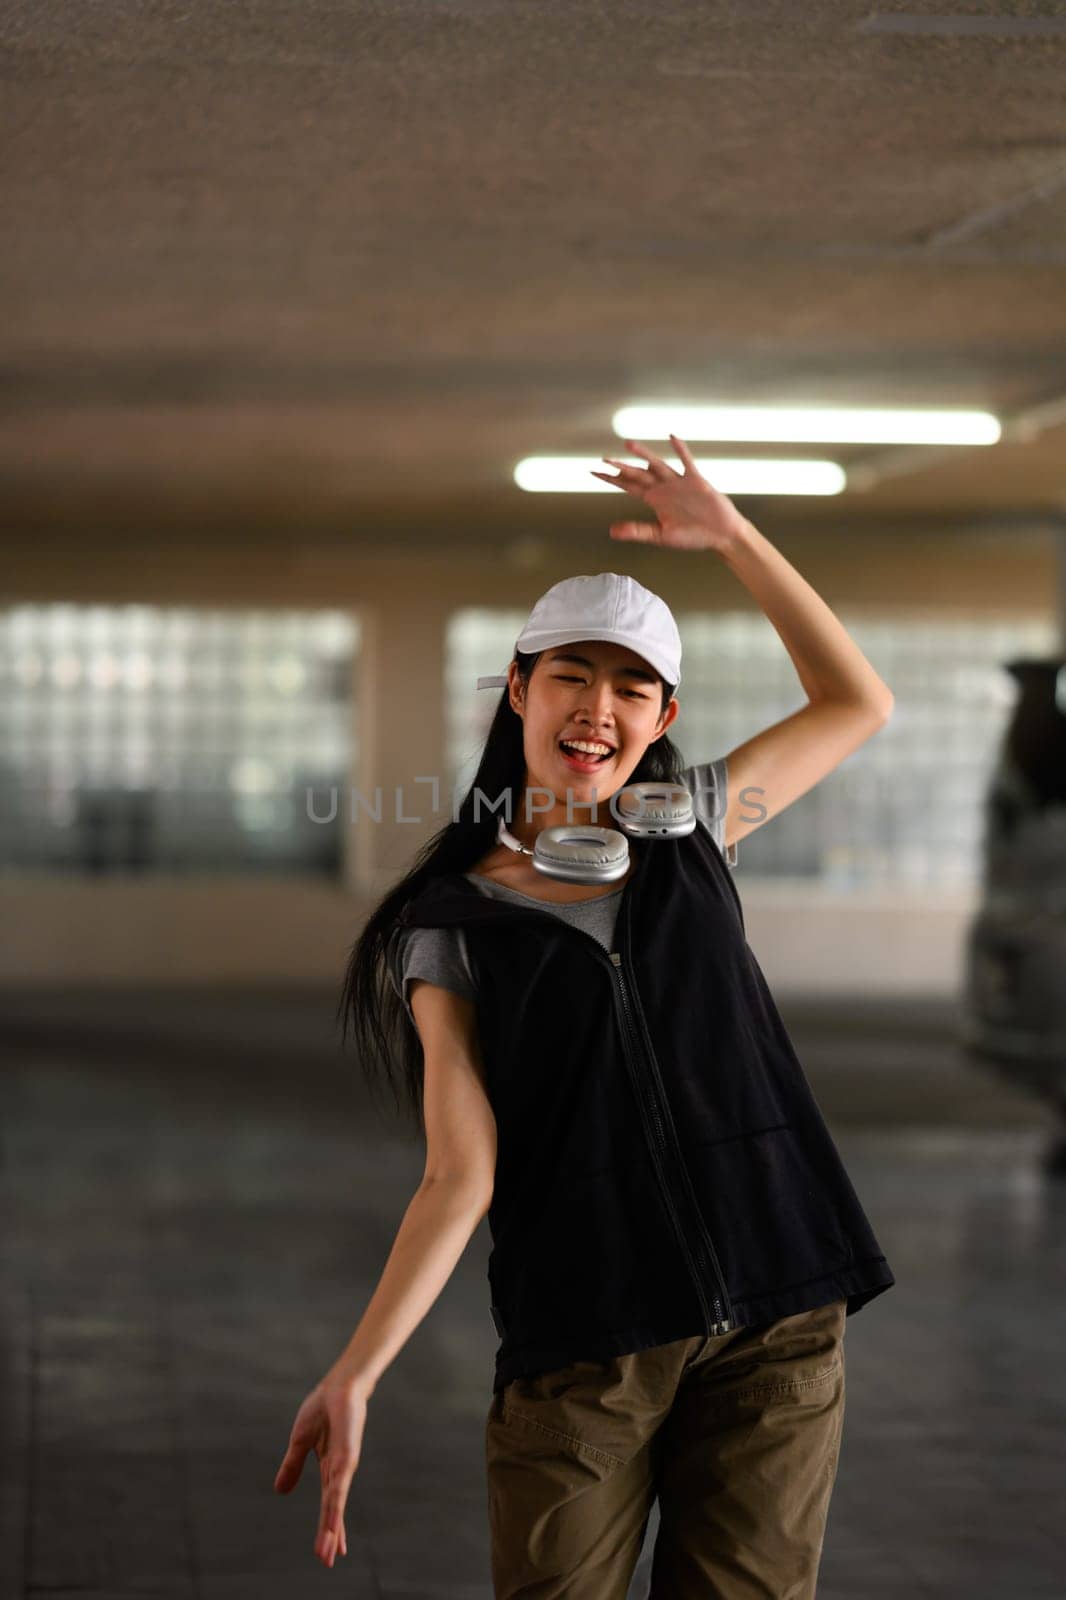 Smiling young woman breakdancing in underground parking lot .Concept of action, sport, youth lifestyle.